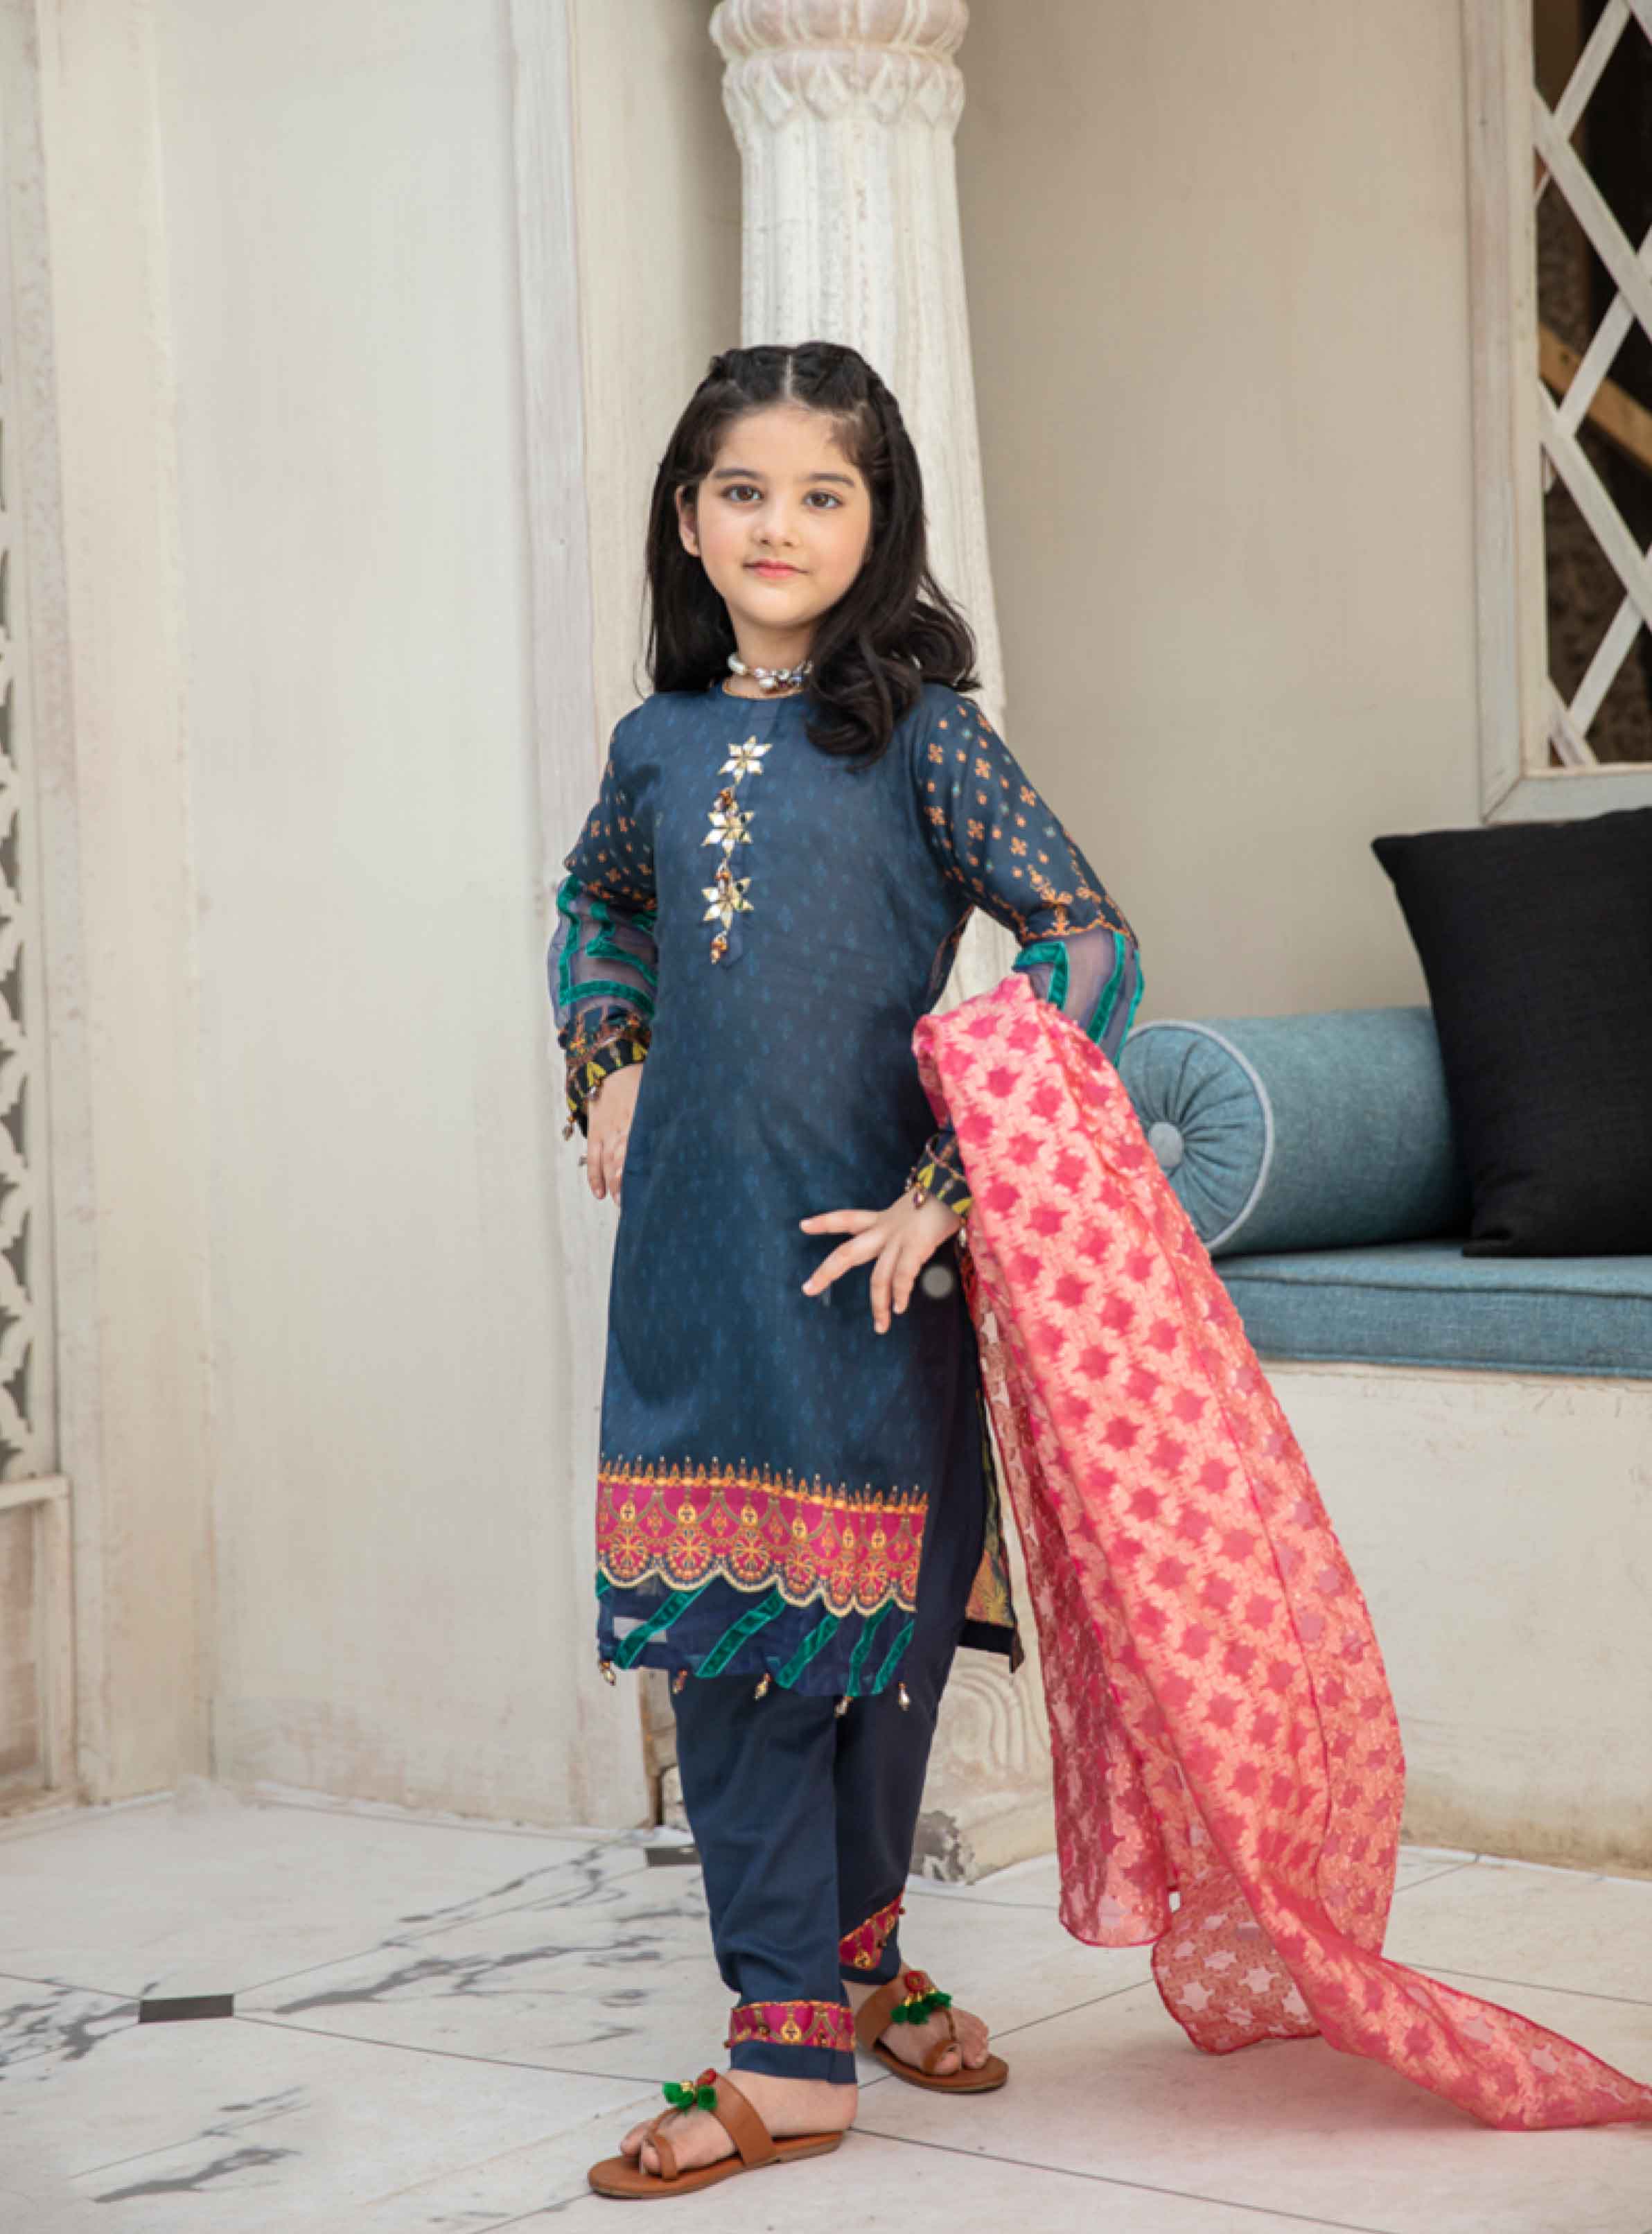 Simrans Girls Afsaneh Mummy & Me Lawn Outfit SMP06K DesiP 